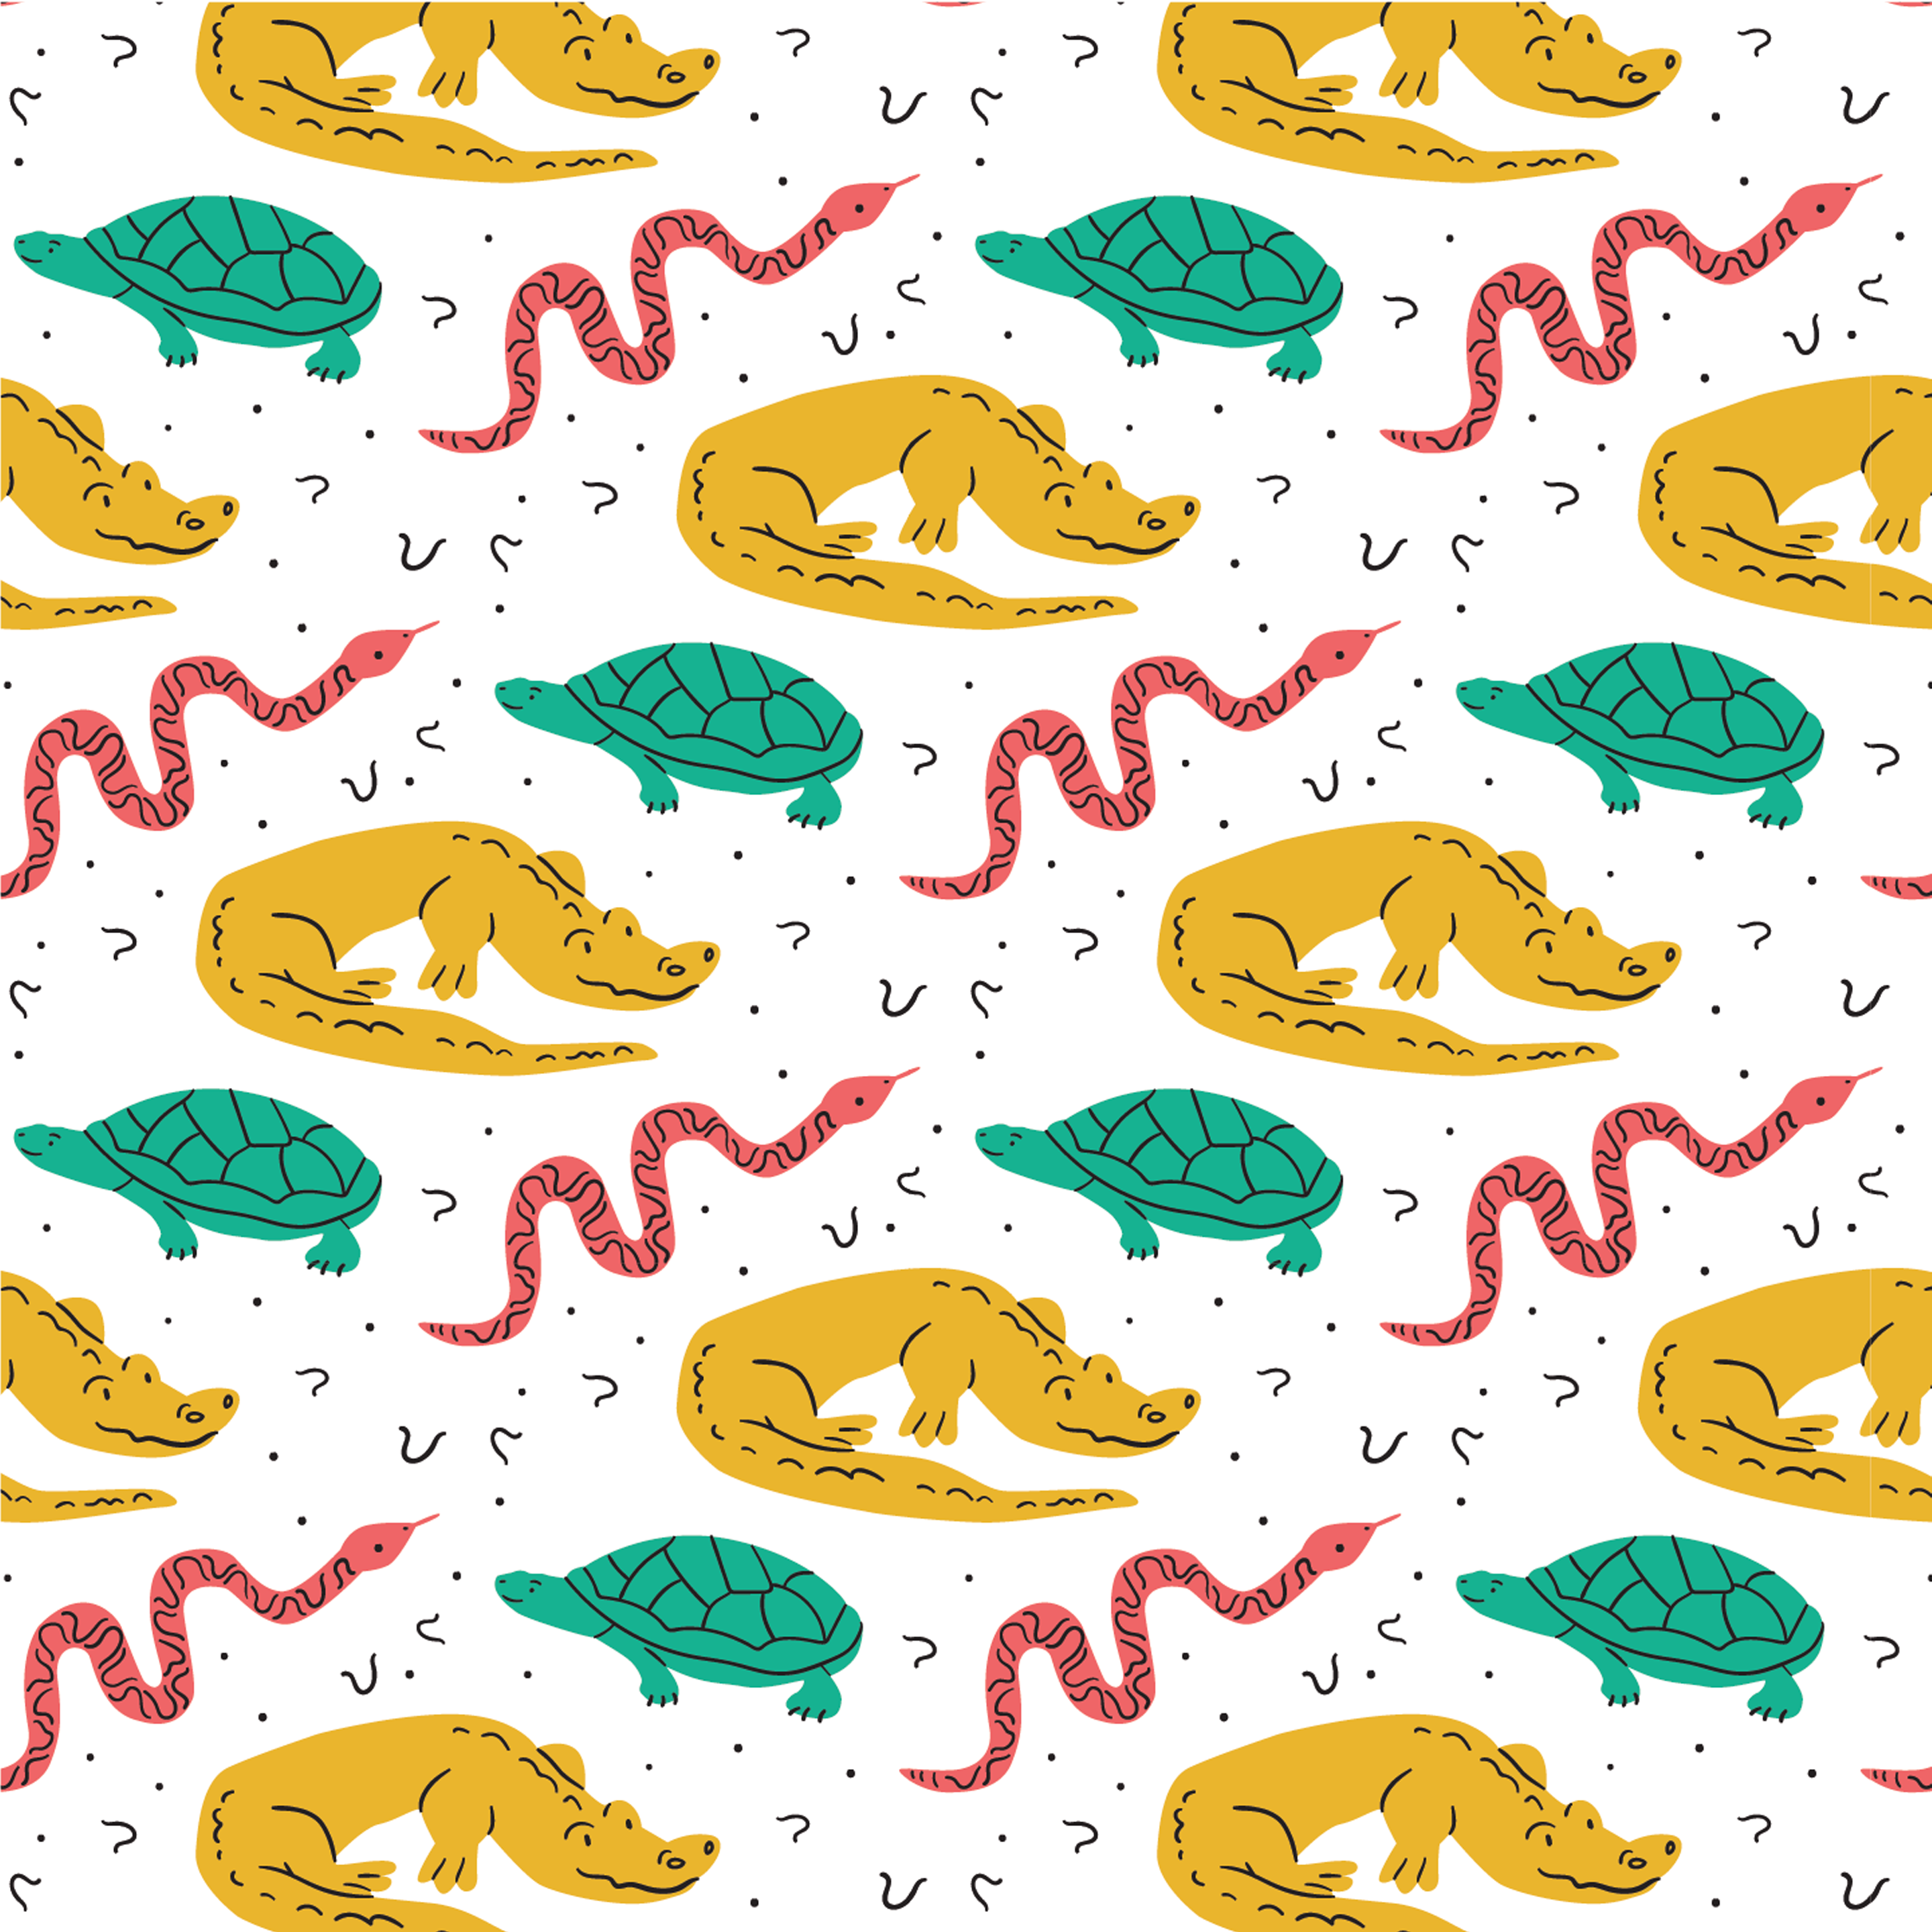 colorful-reptiles-pattern-design-theme.png